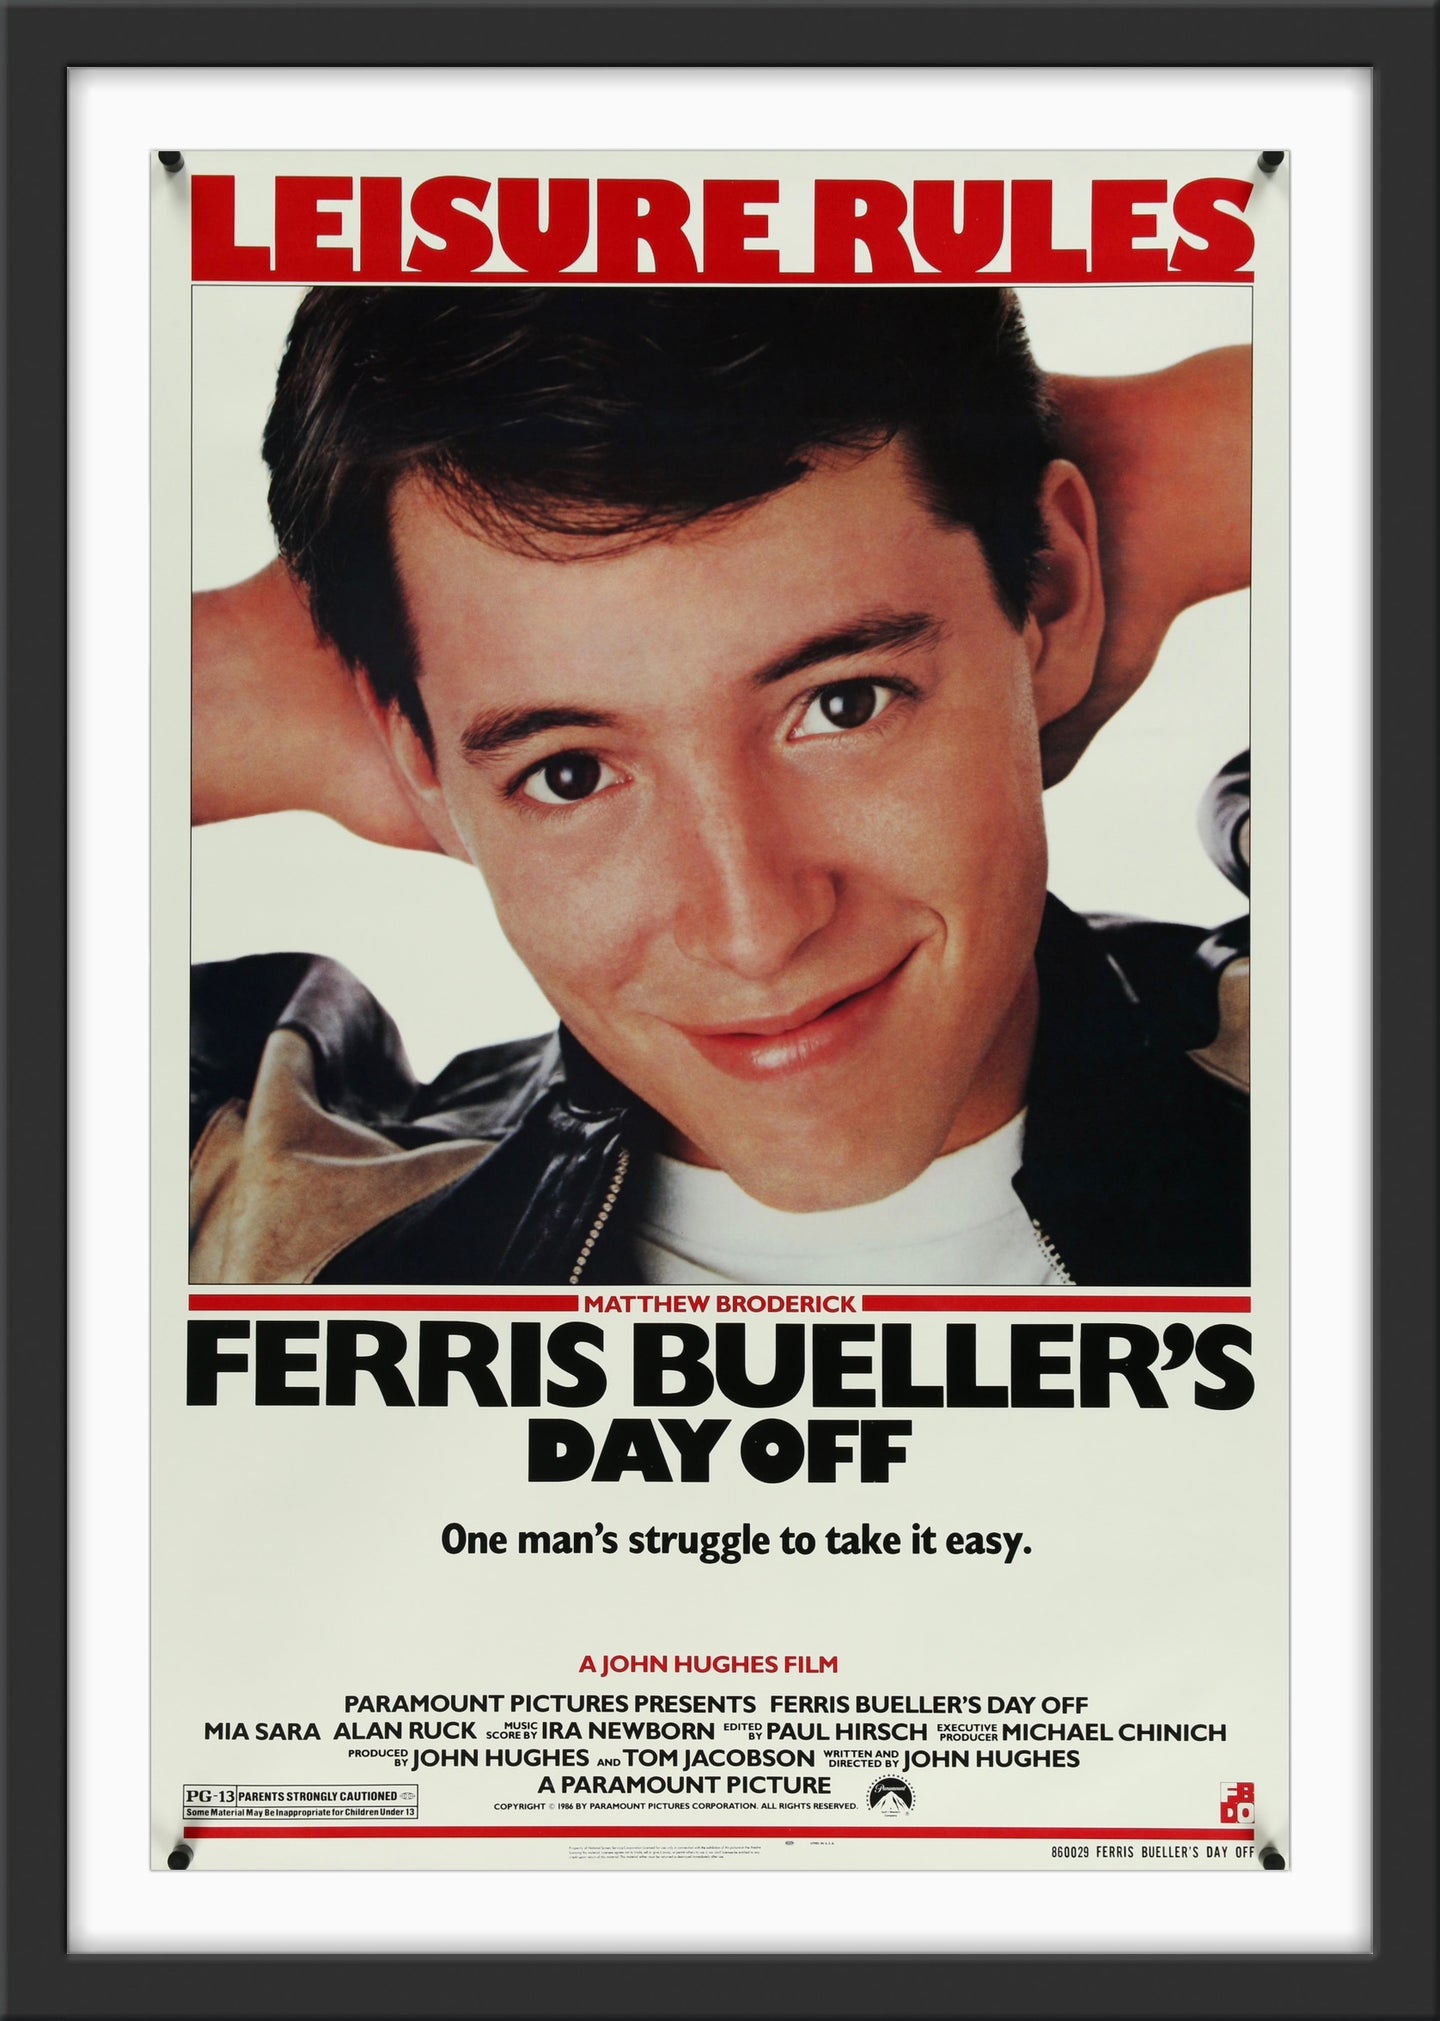 An original movie poster for the film Ferris Bueller's Day Off